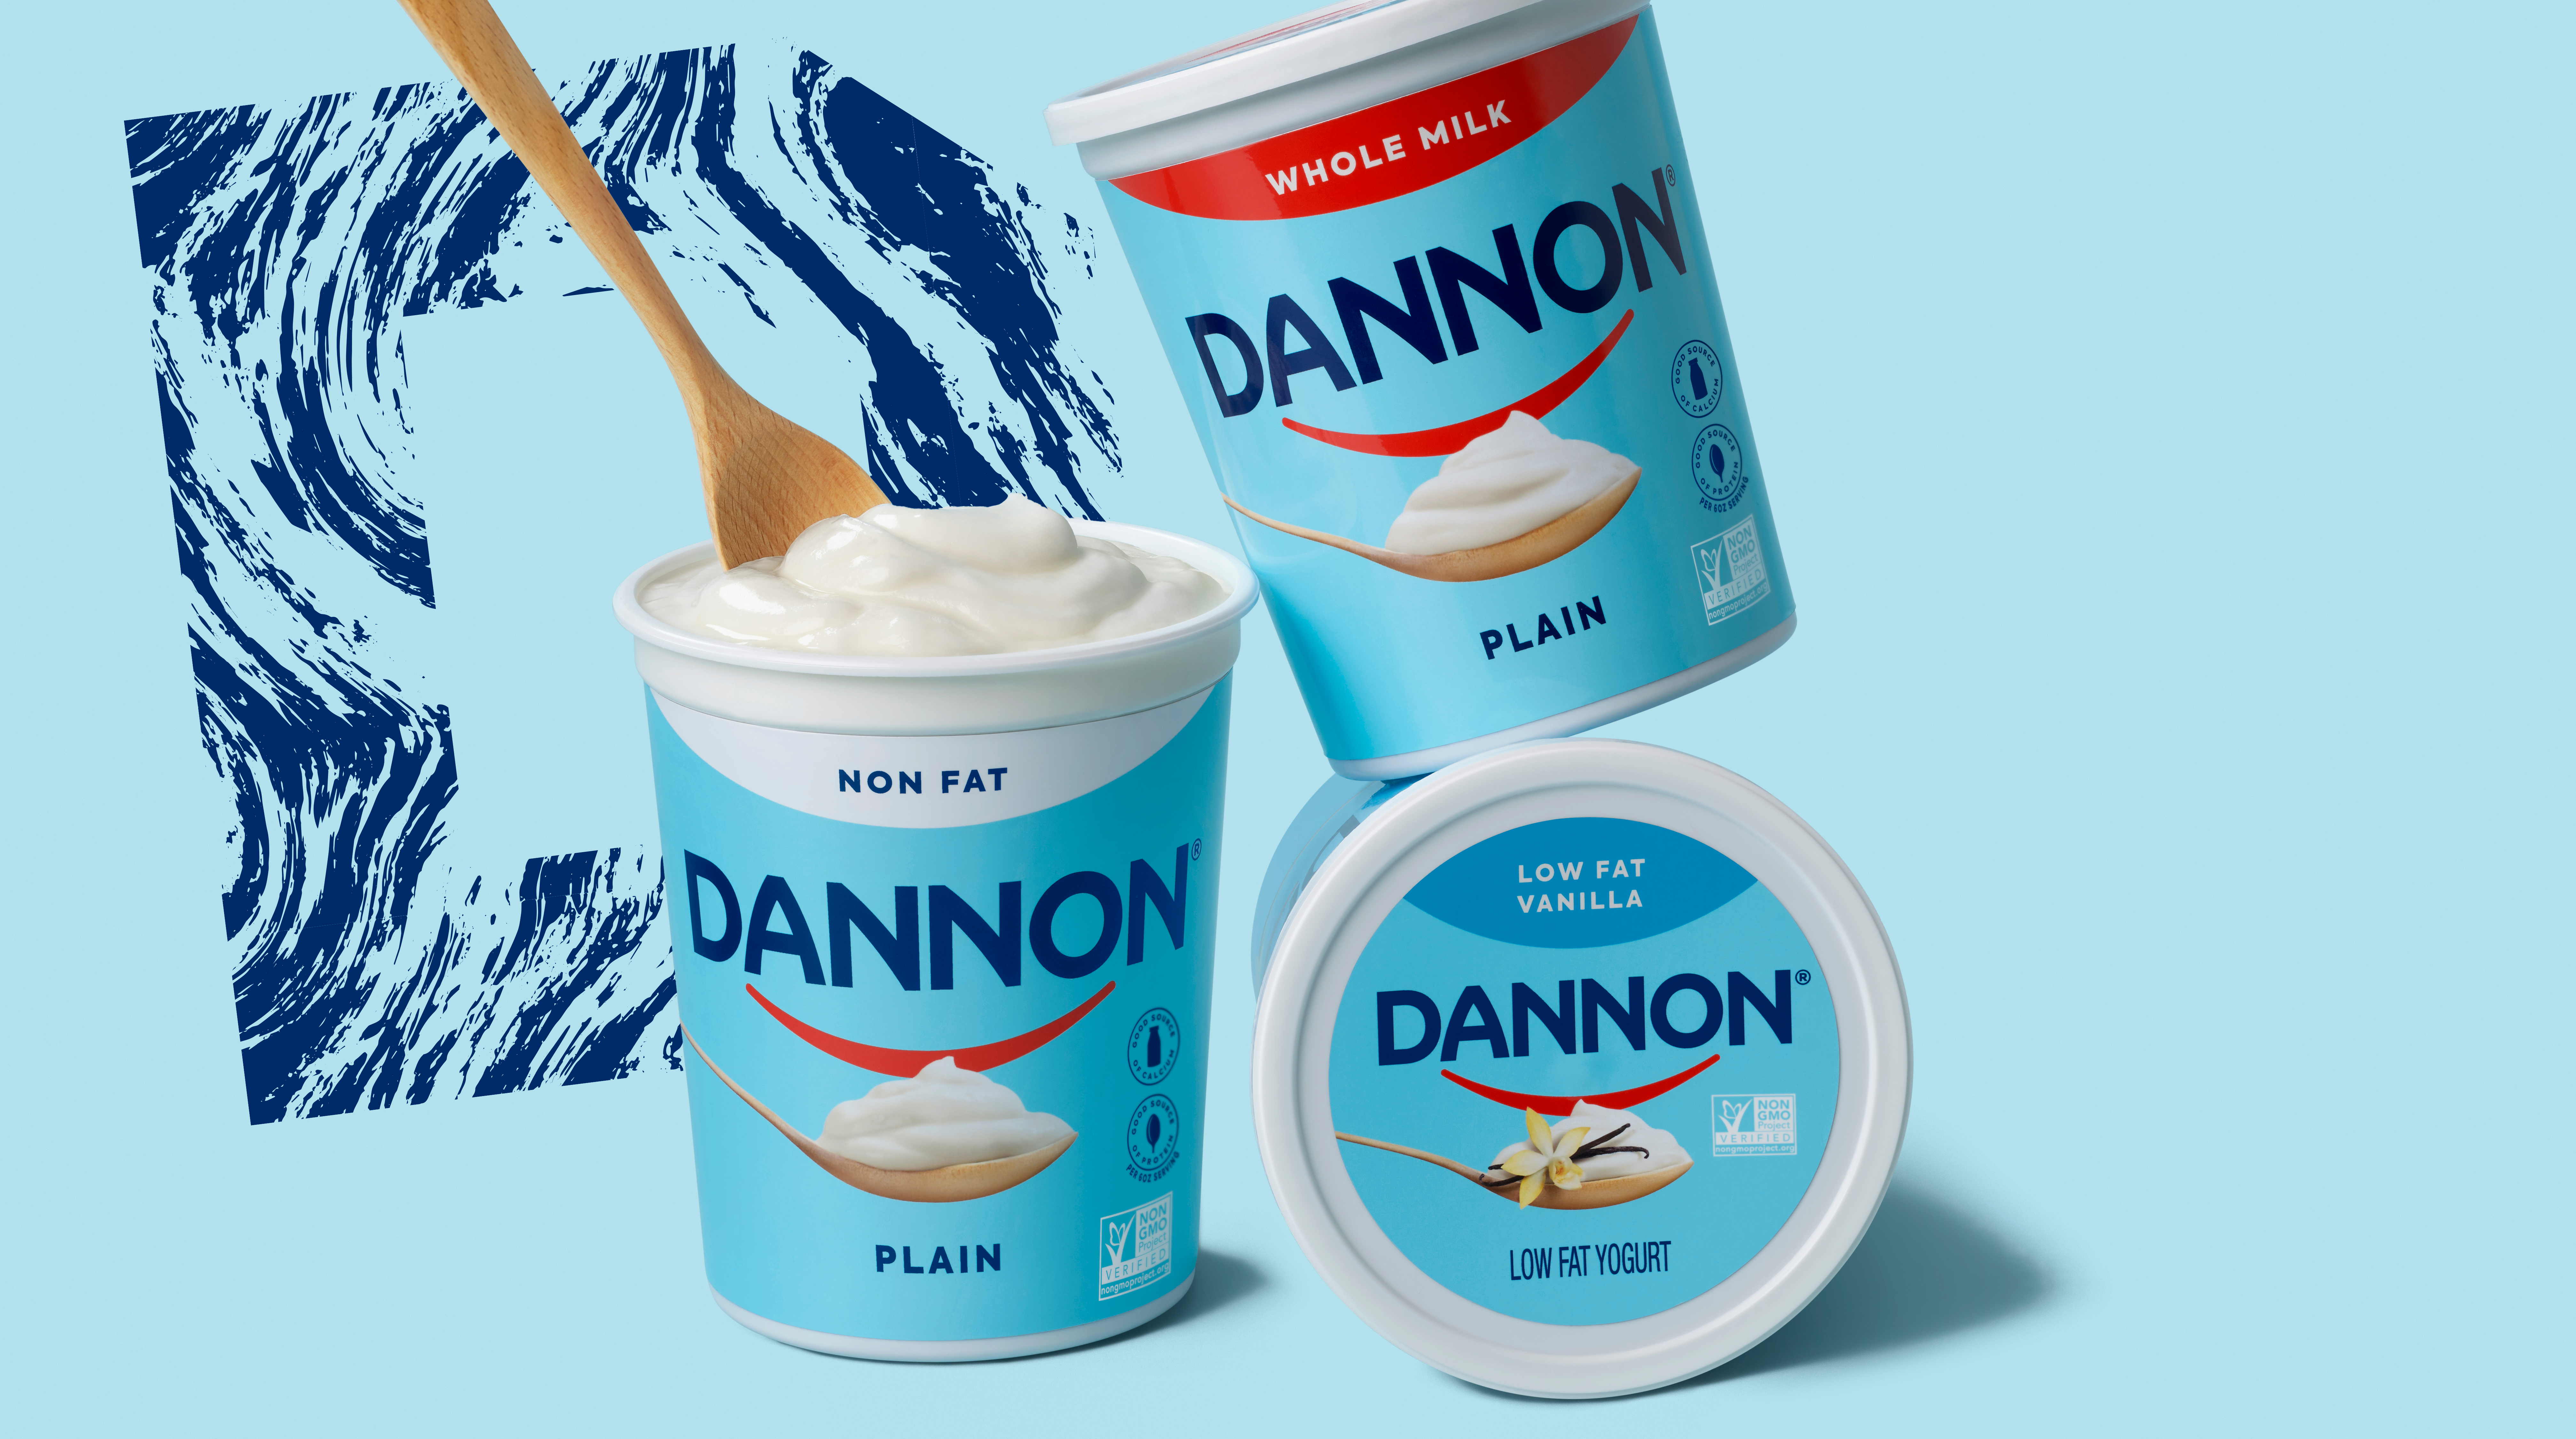 In House with Danone: Working at One of the World’s Largest Food and Beverage Companies